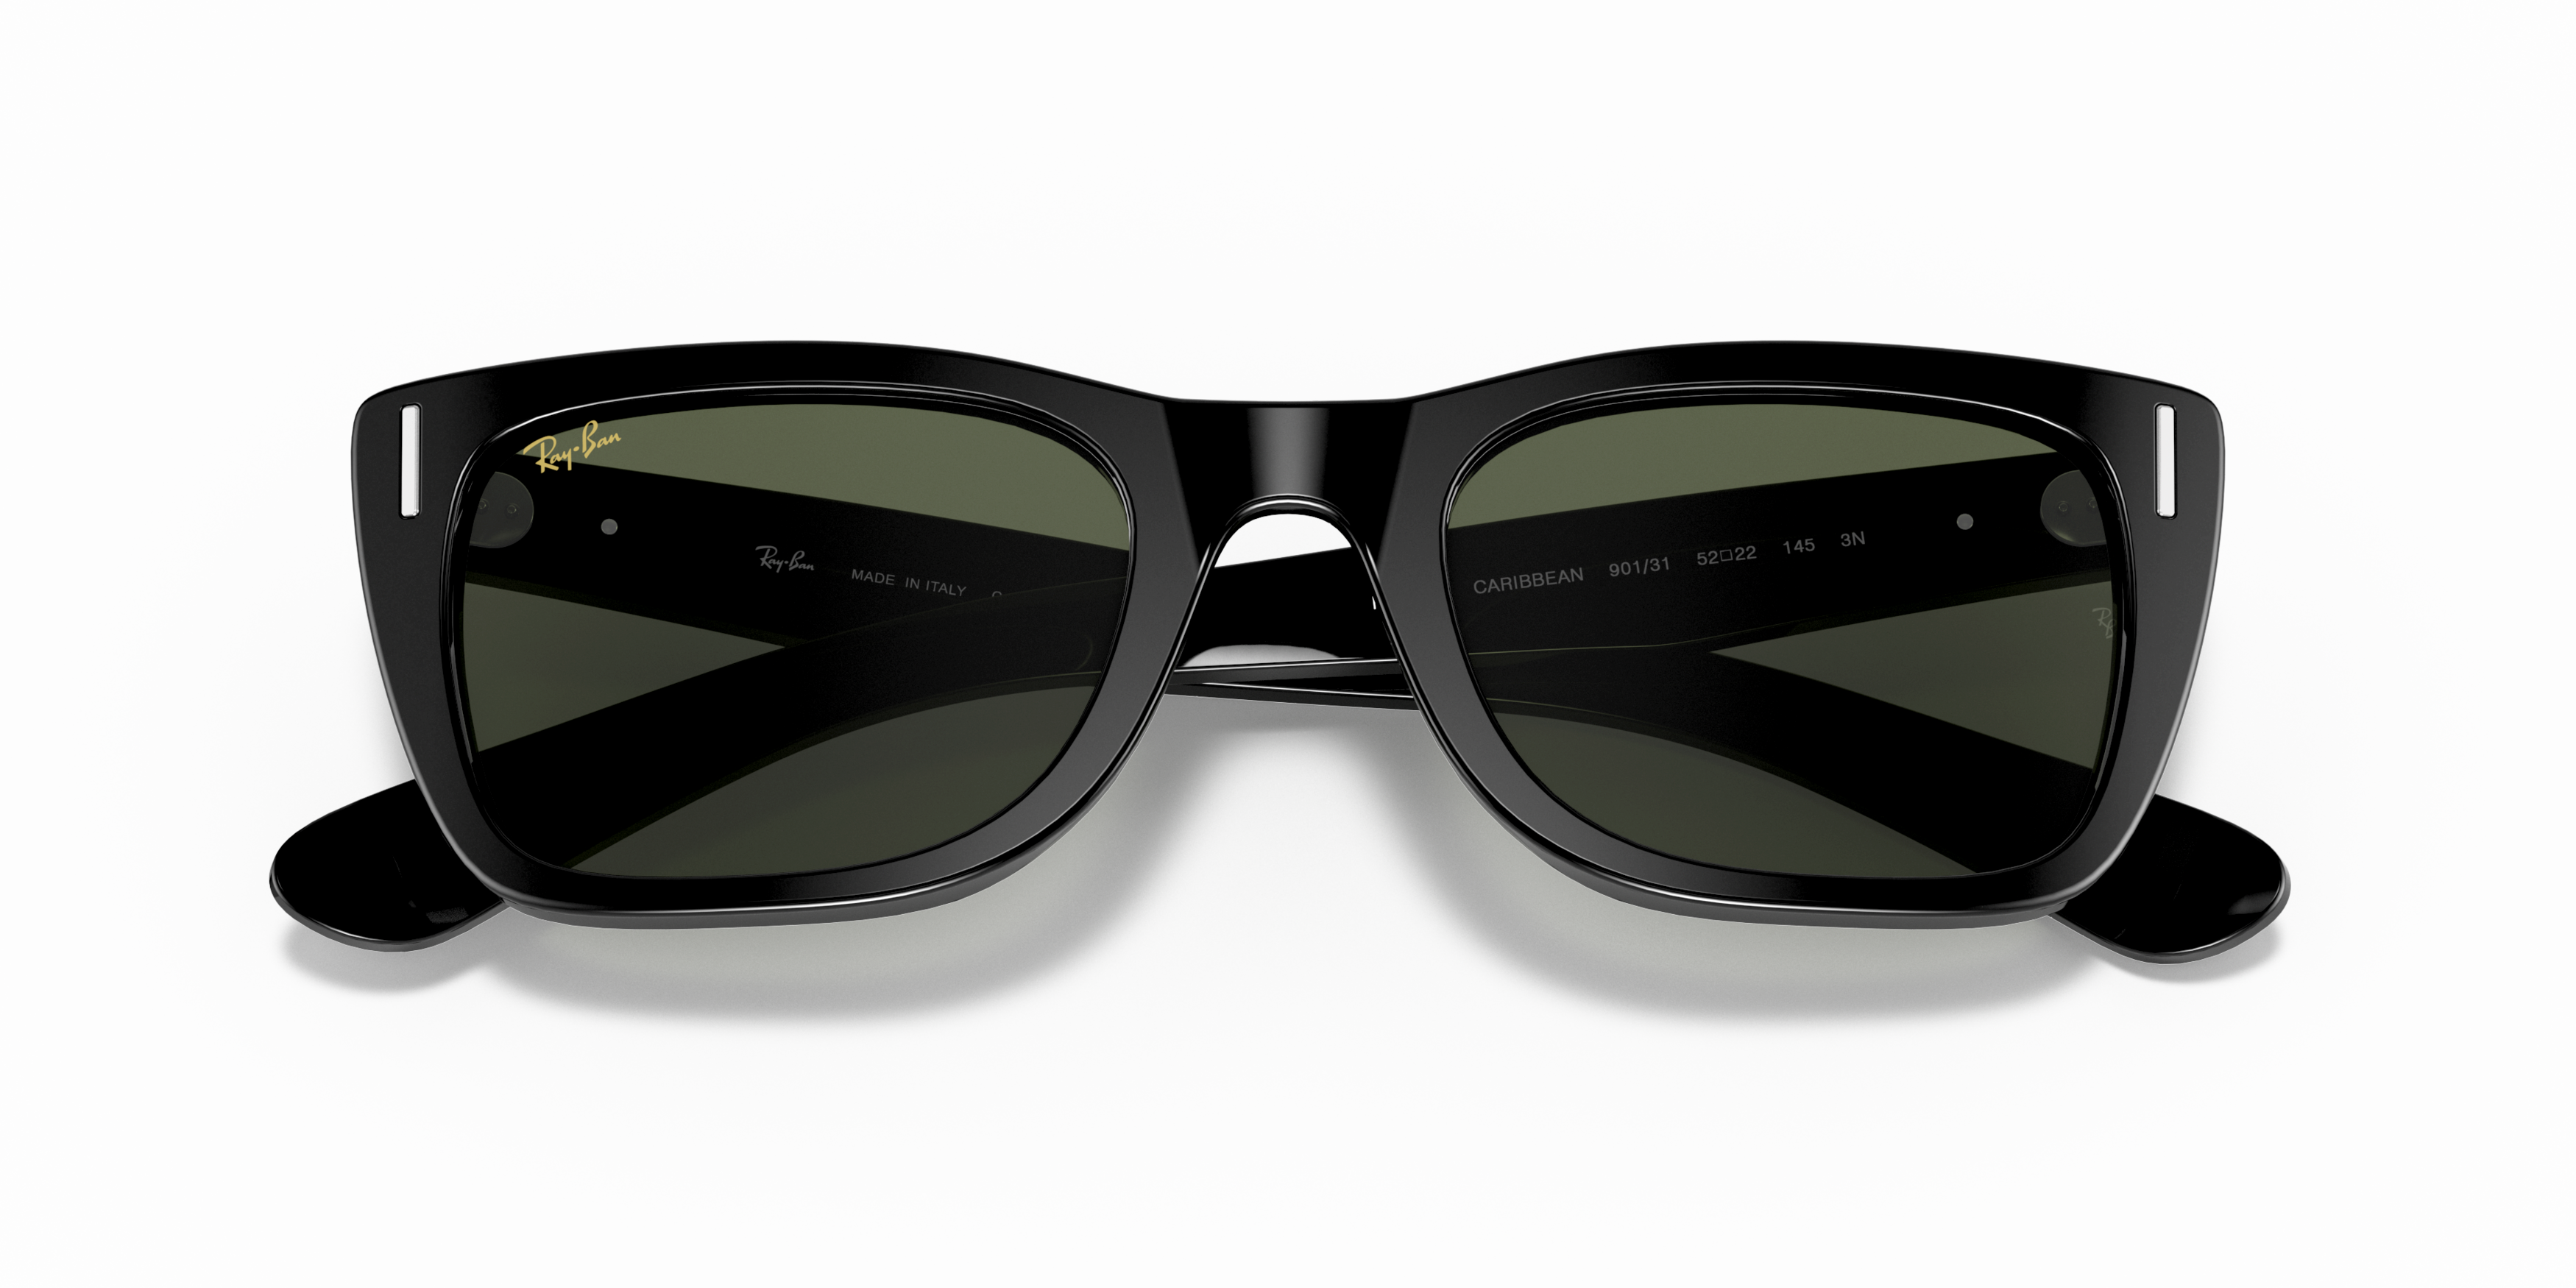 [products.image.folded] RAY-BAN RB2248 901/31